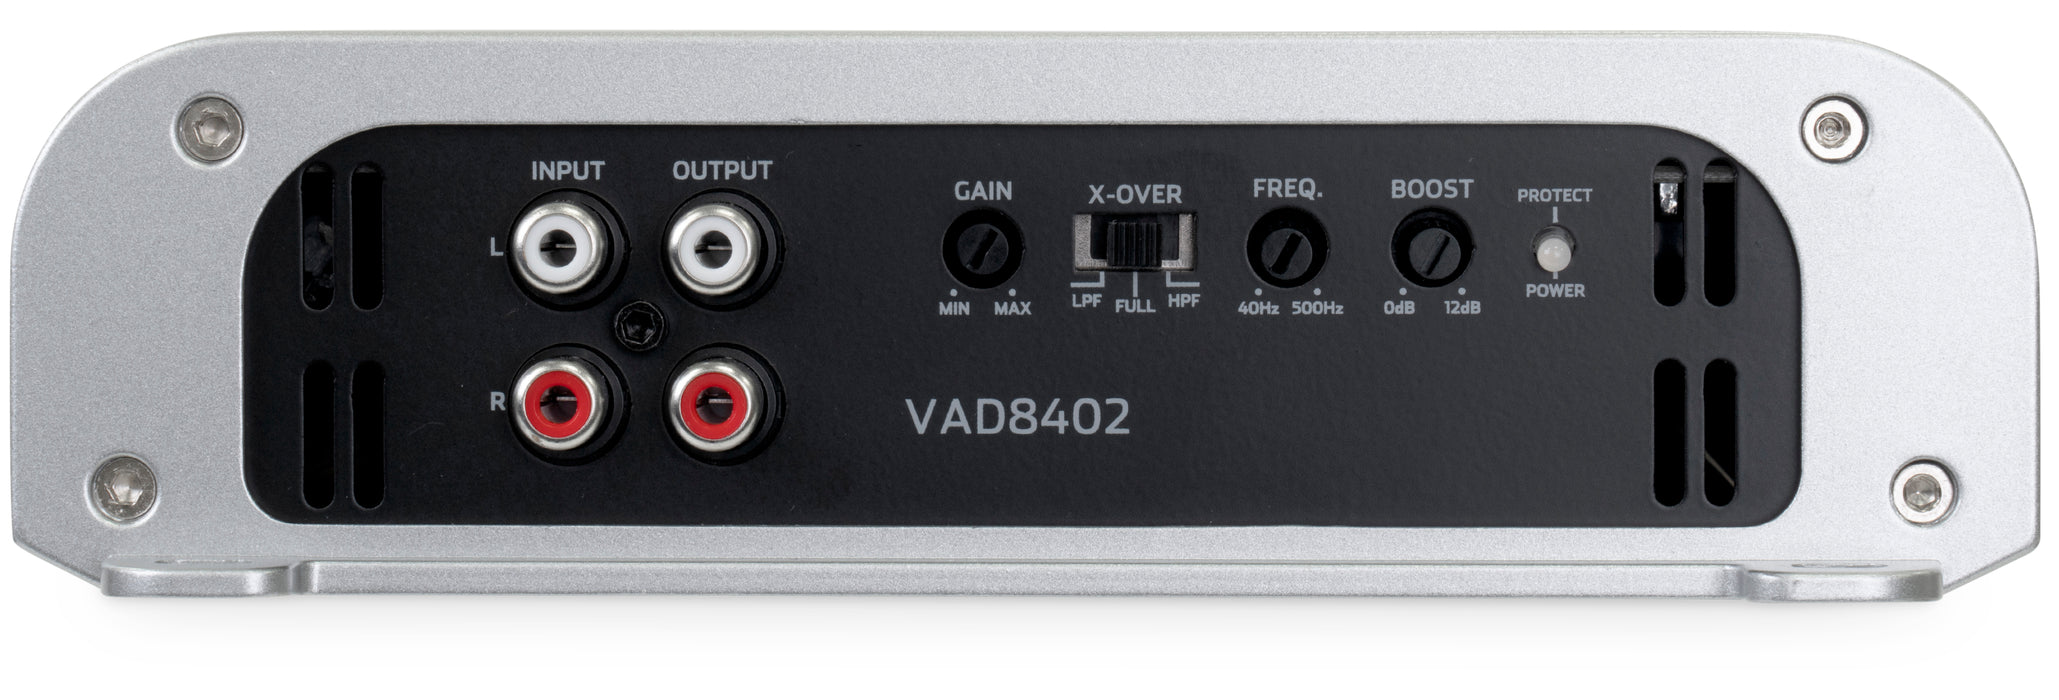 VAD8402 840W RMS V-Series Full-Range Class-D 2-Channel Amplifier (Marine Certified)